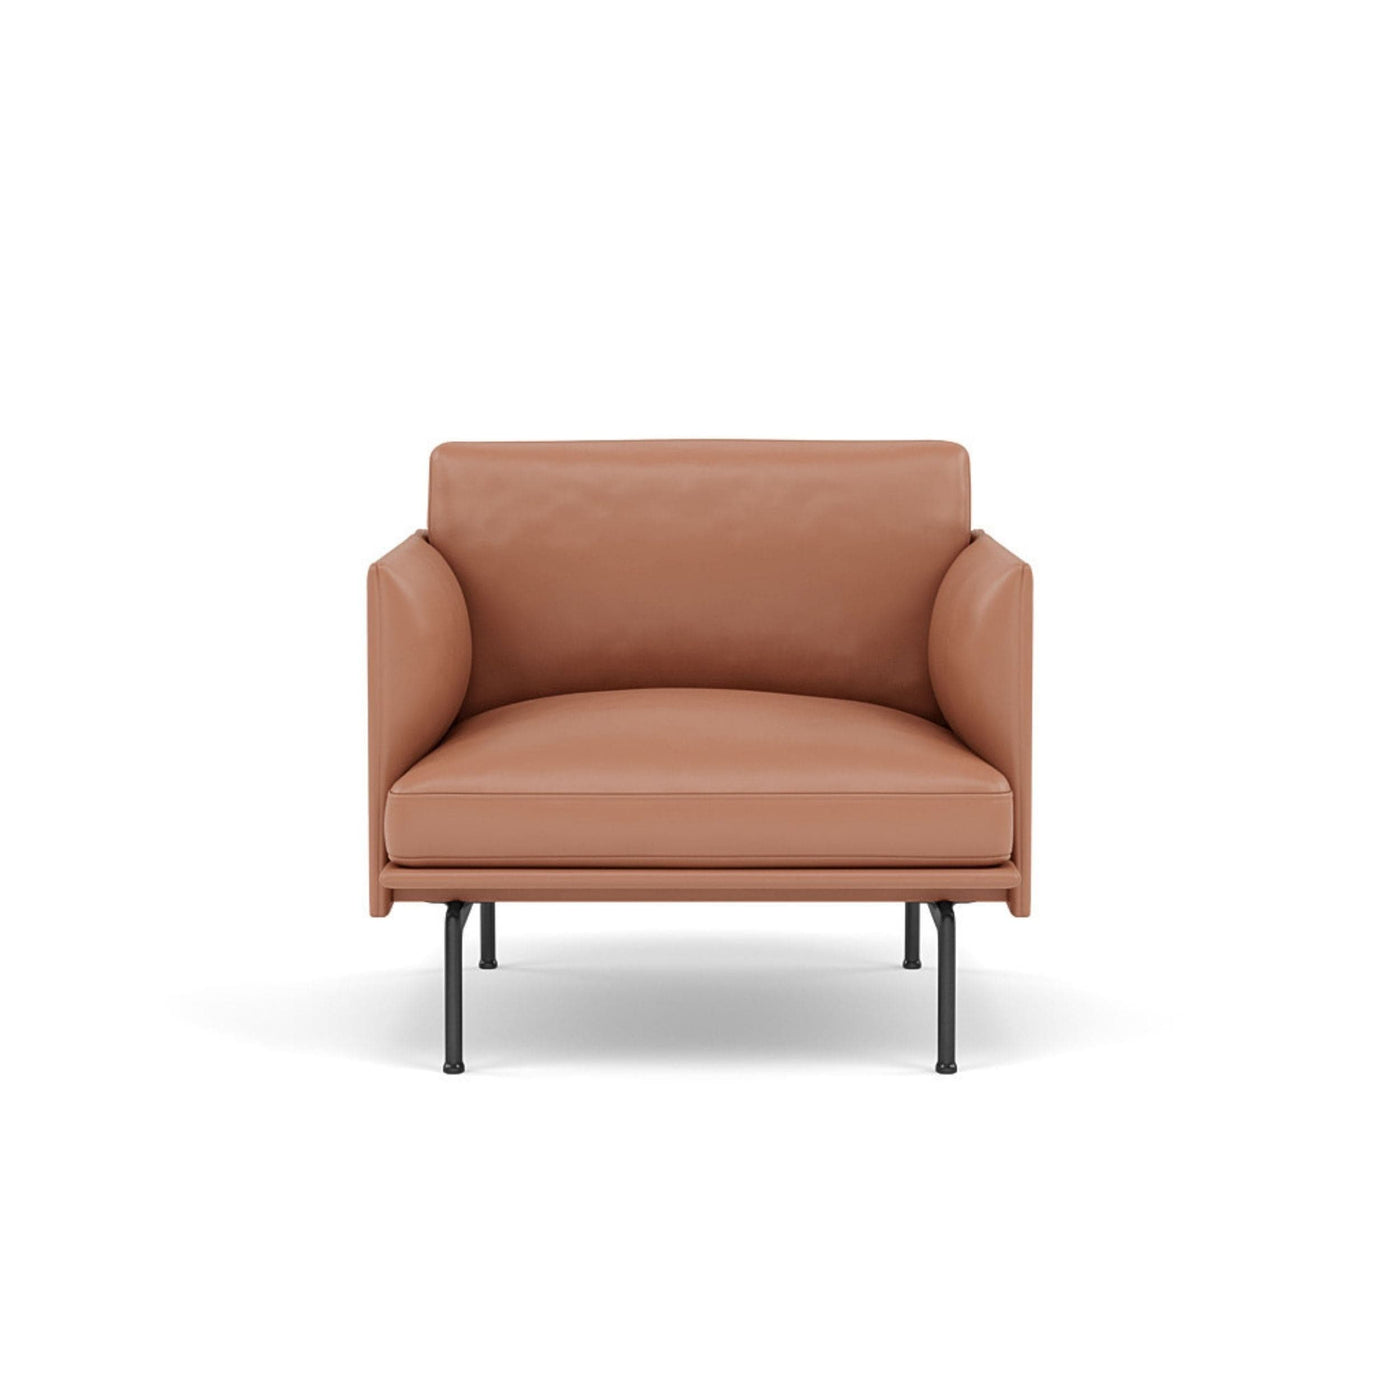 muuto outline studio chair in cognac refine leather and black legs. Available at someday designs. #colour_cognac-refine-leather